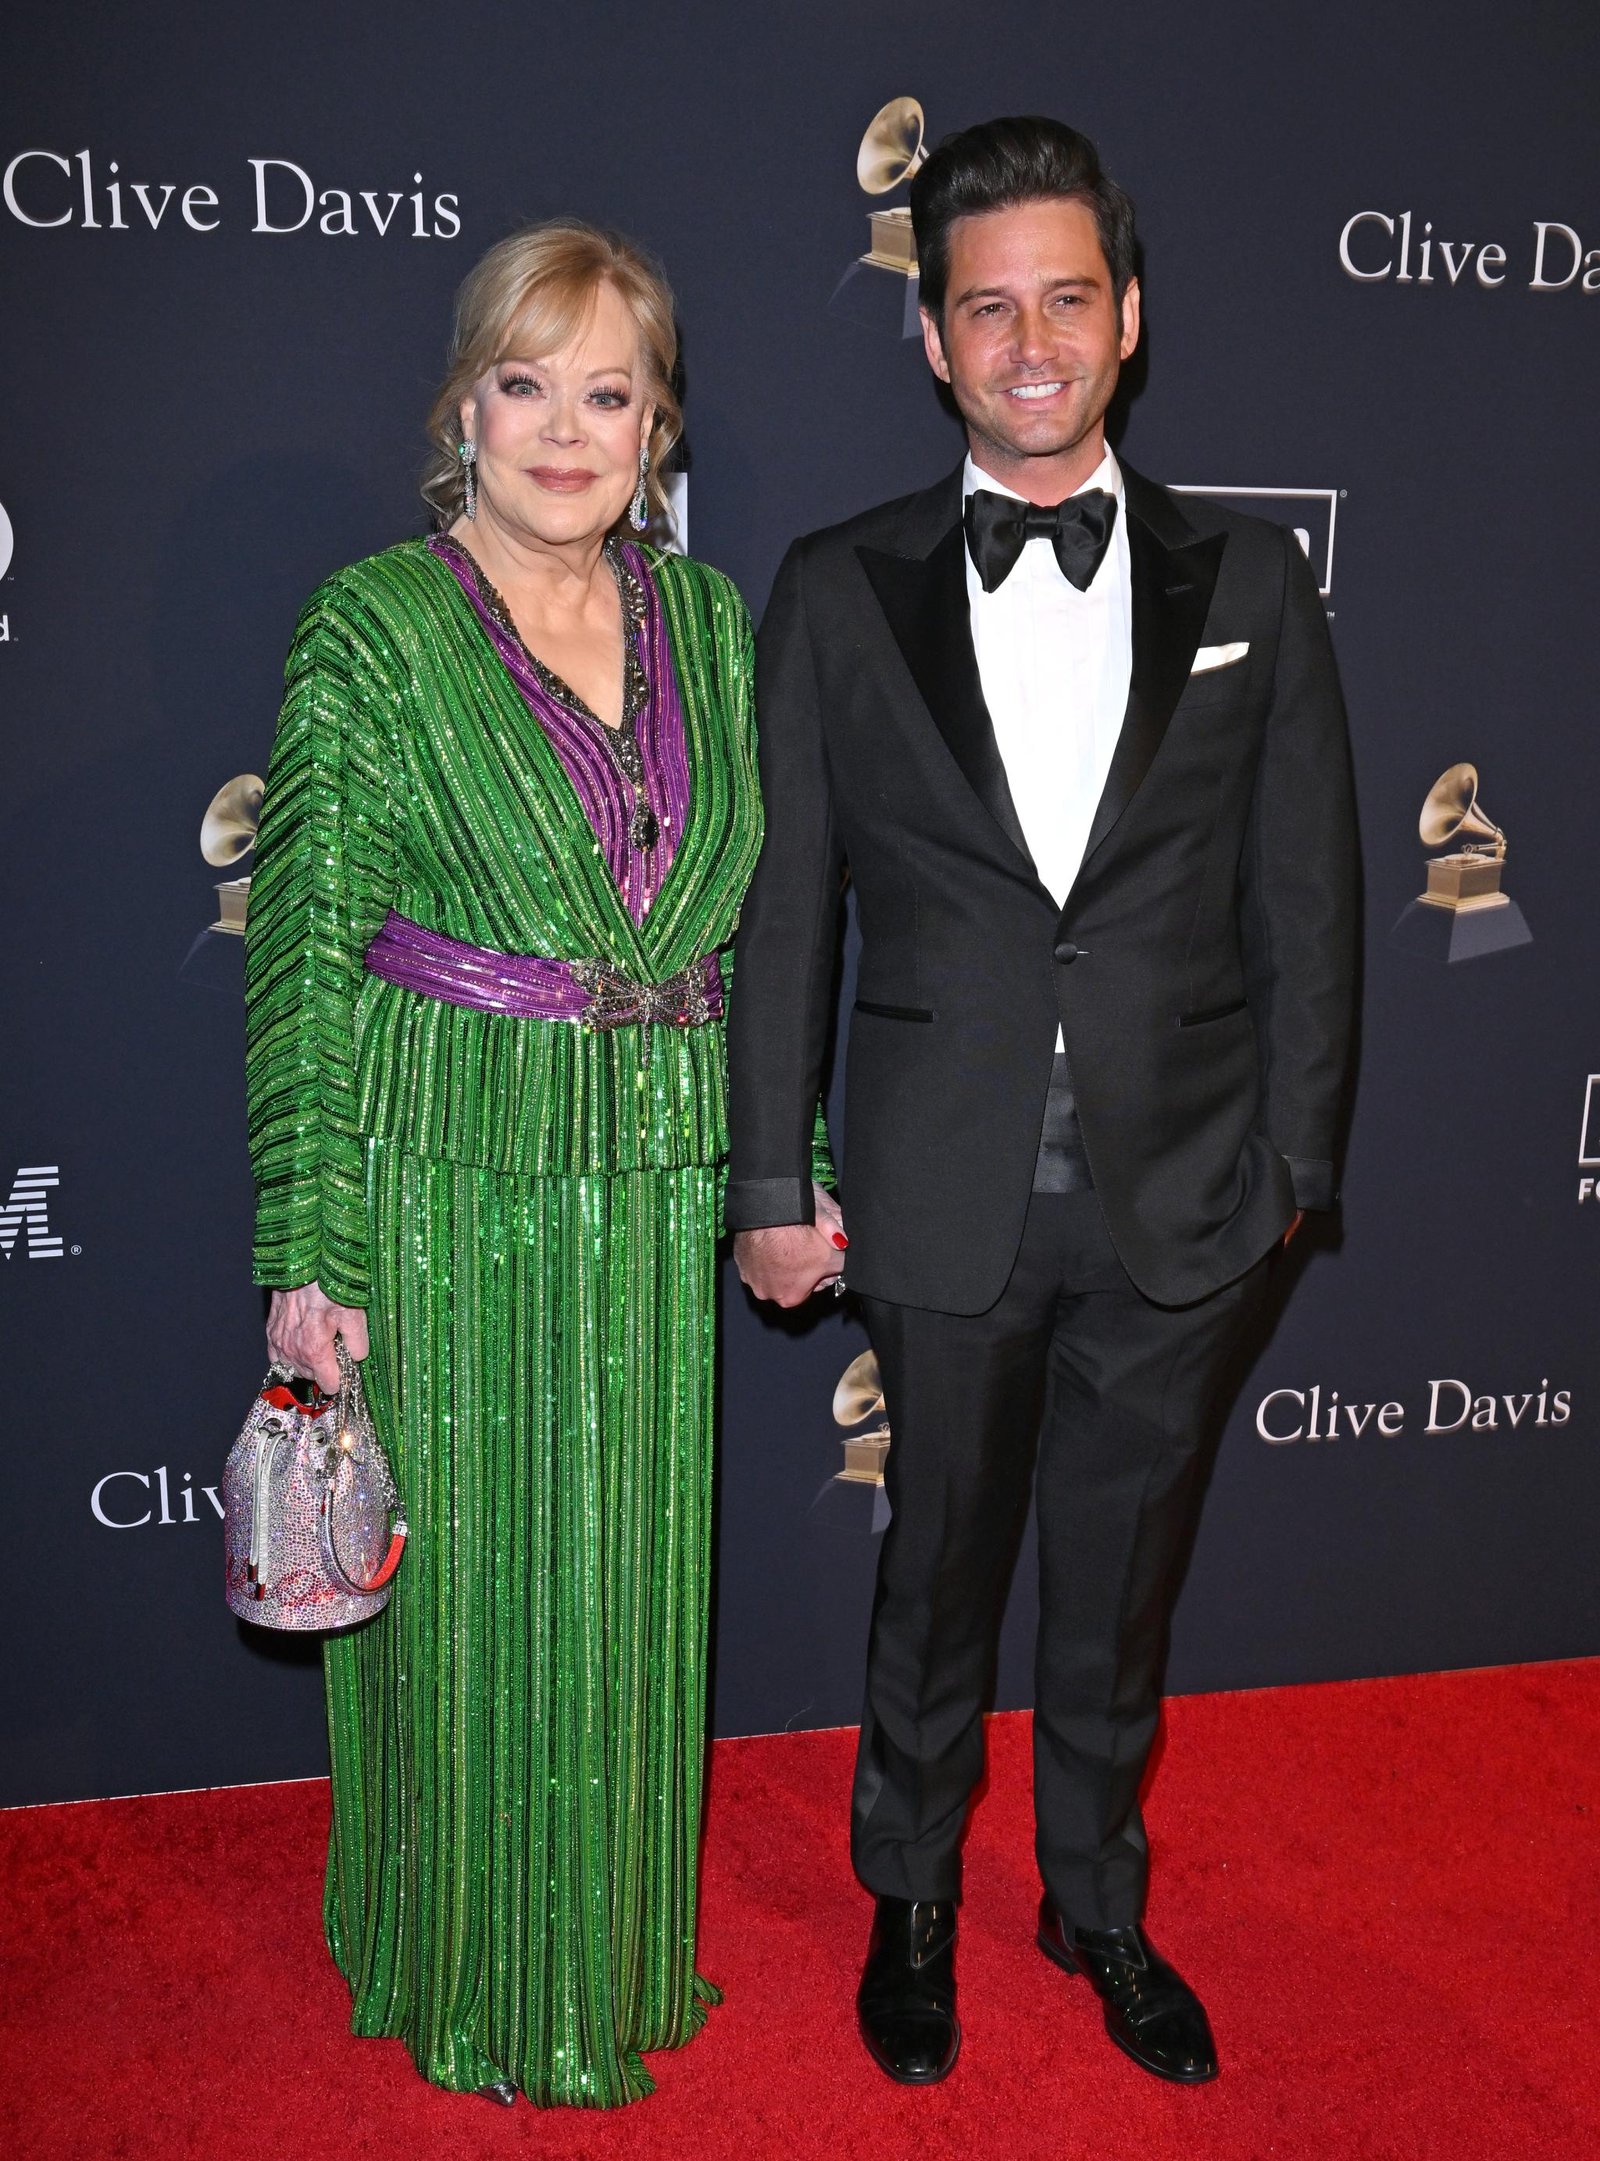 Josh Flagg and Candy Spelling posing together on a red carpet.